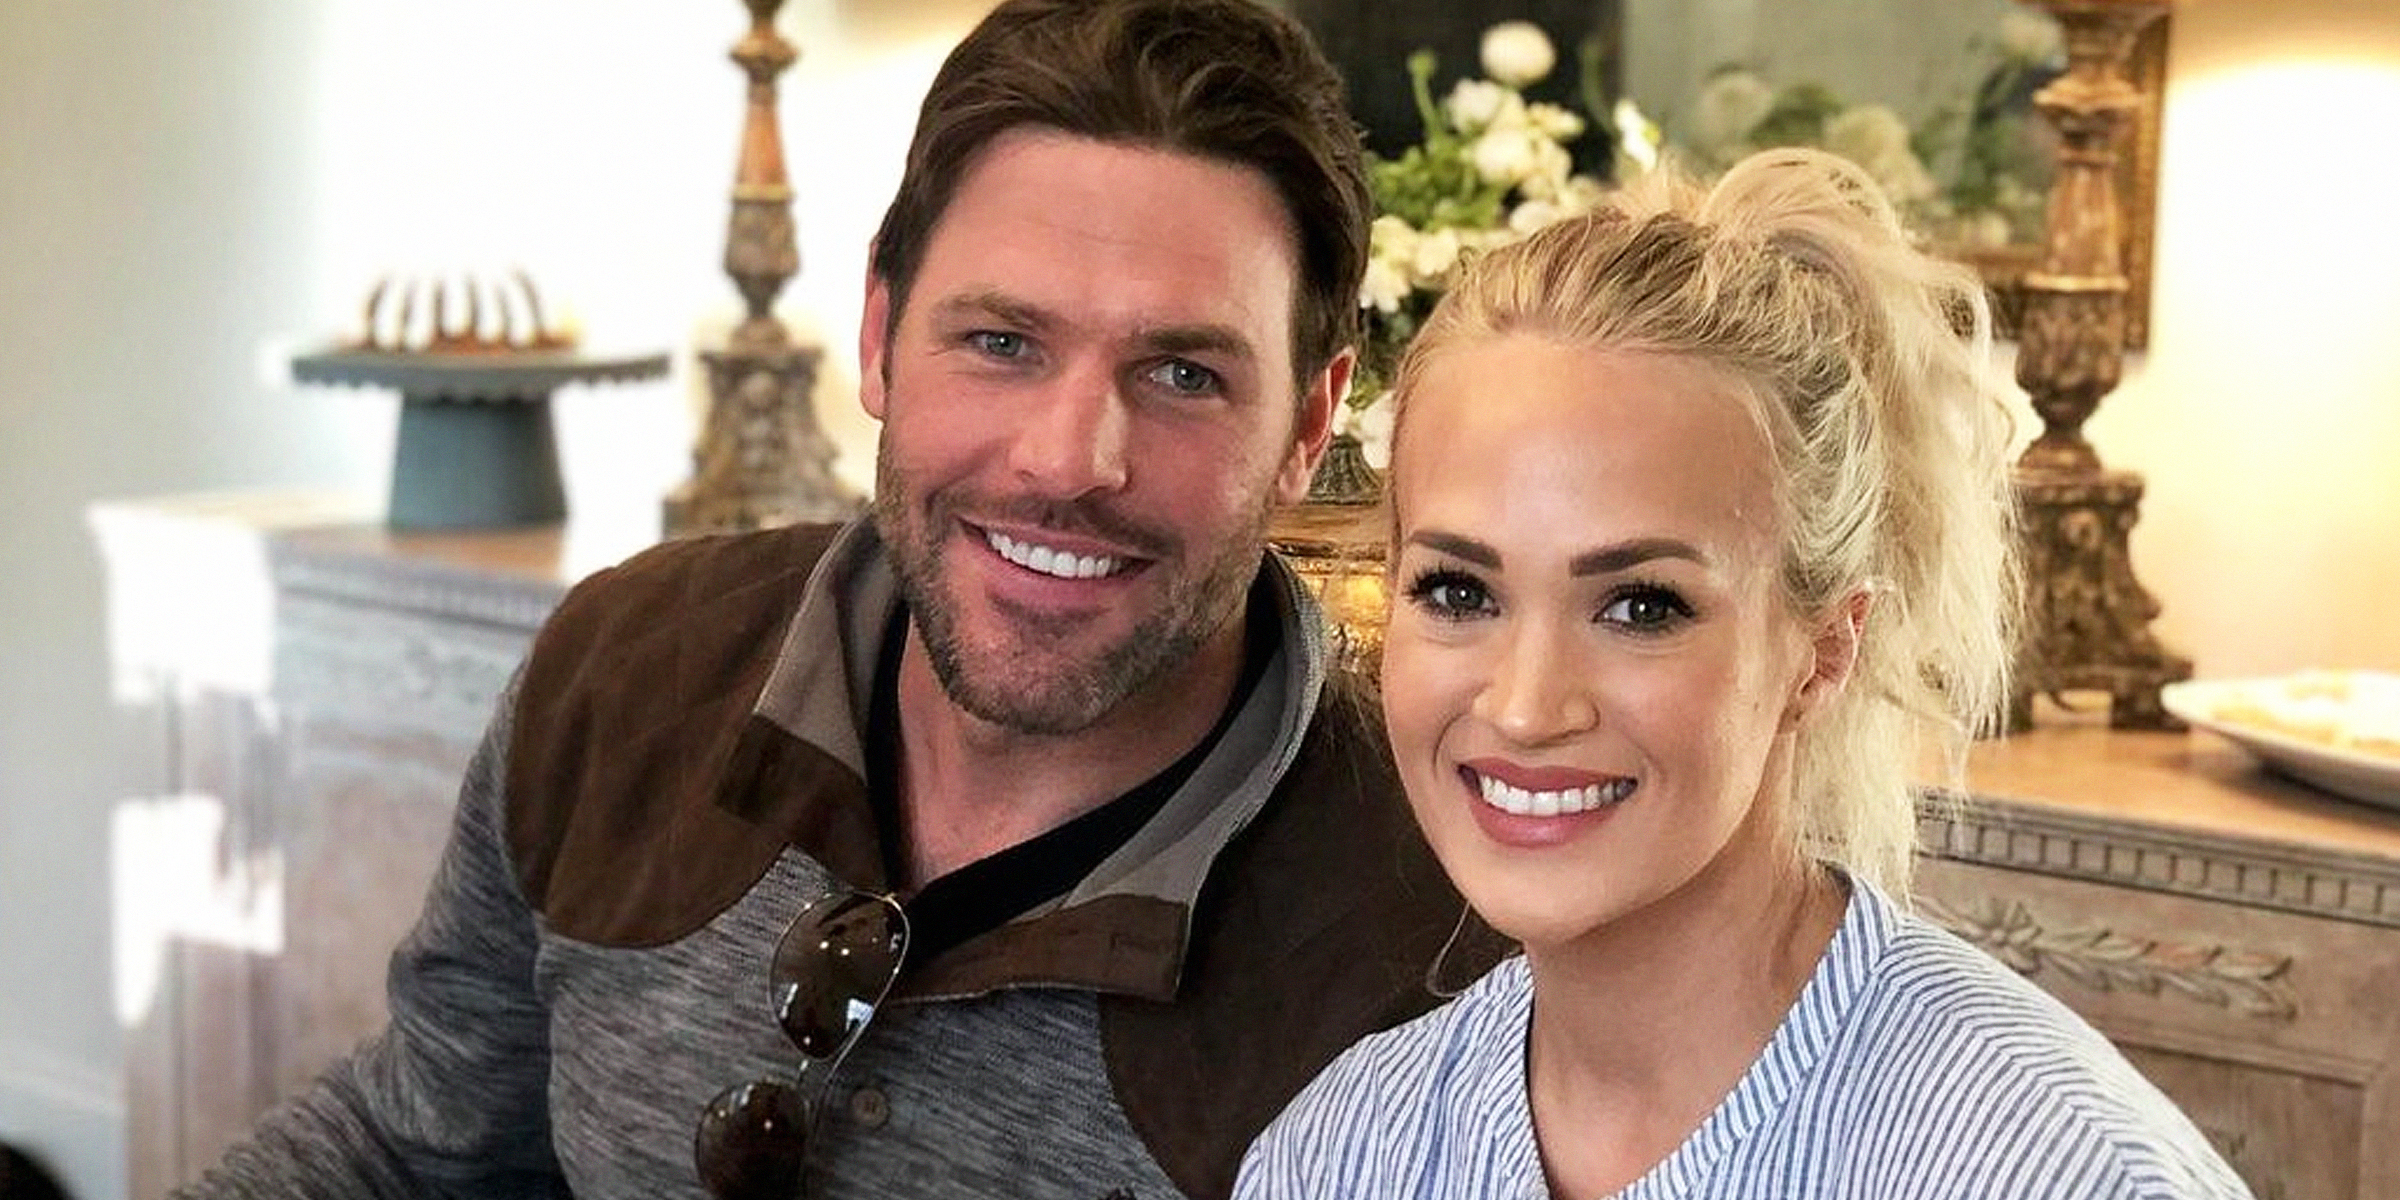 Carrie Underwood and Mike Fisher | Source: Instagram.com/mfisher1212